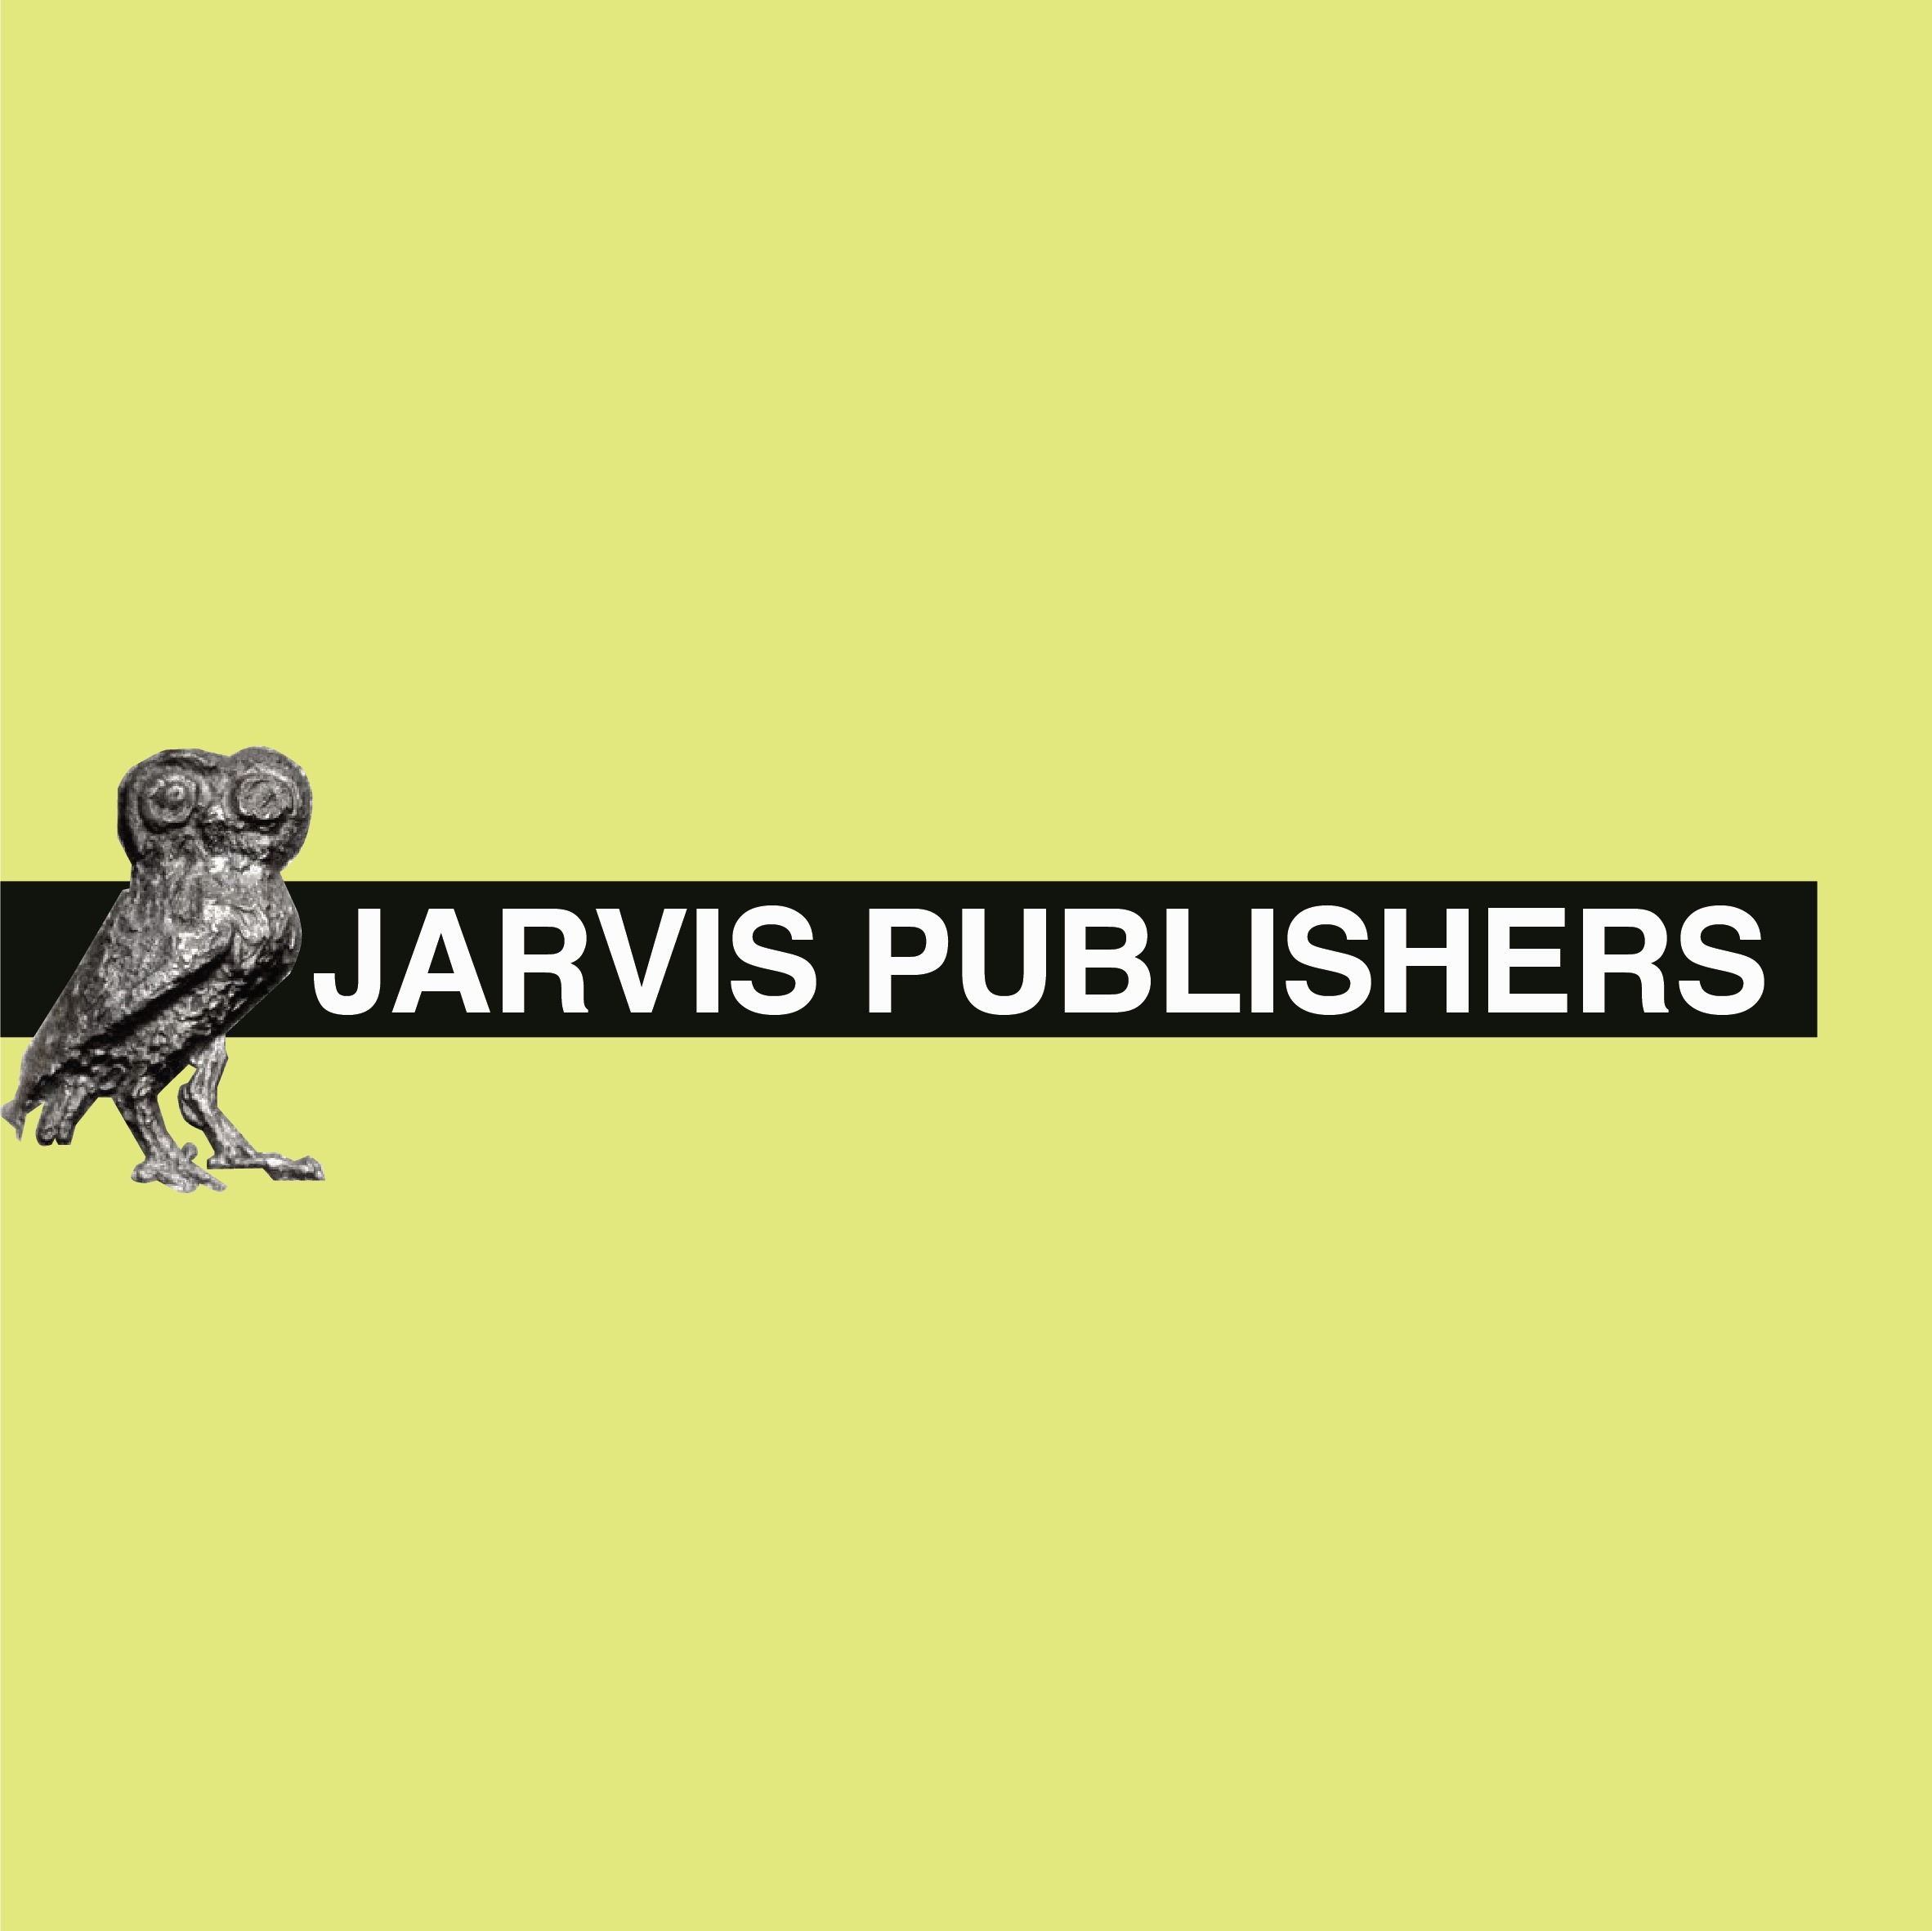 Indie Publisher Jarvis Publishers Announces Treasure Hunt in New York City to Promote New Book.